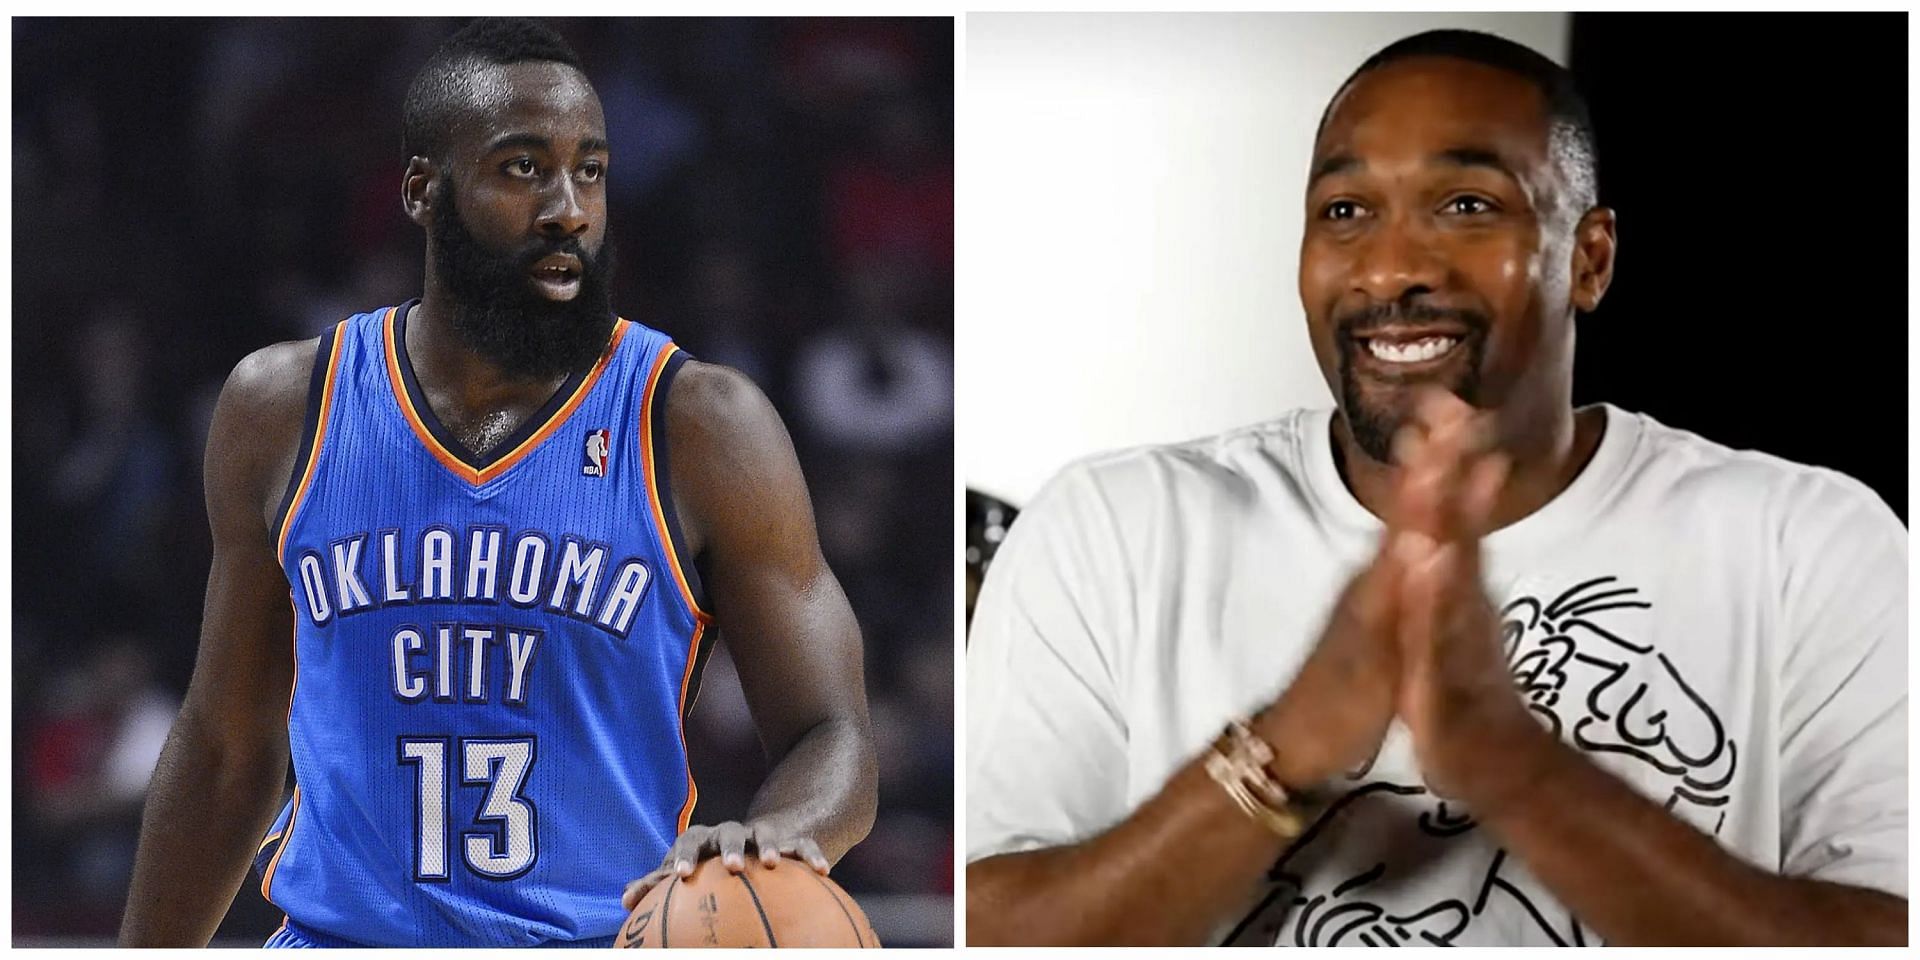 Gilbert Arenas makes bold claim about OKC losing James Harden over $4 million.